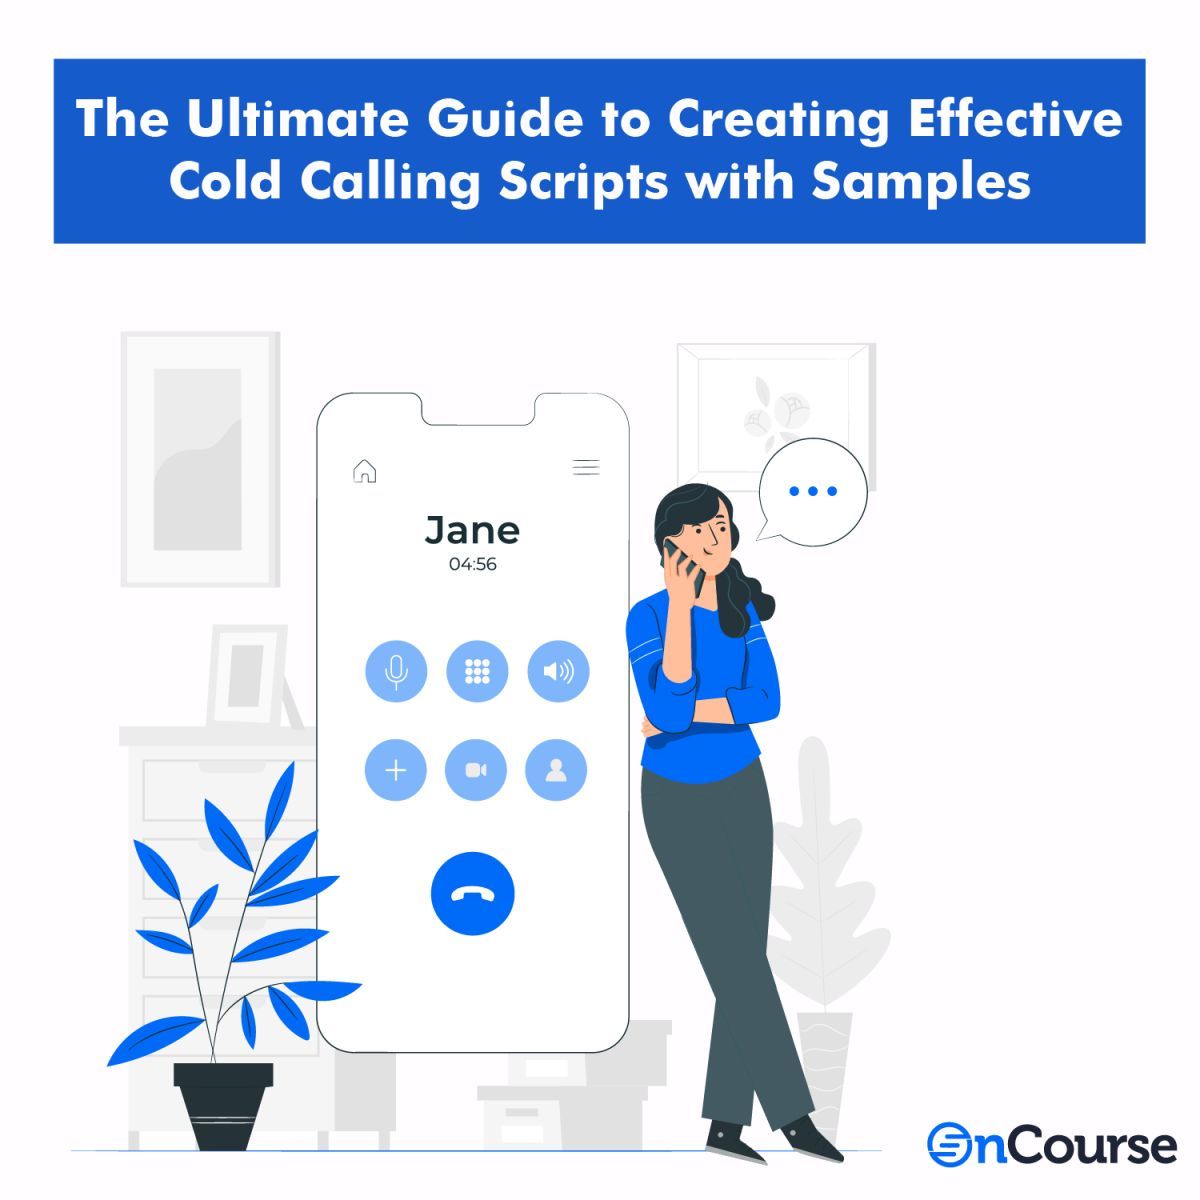 Cold Calling Scripts: The Ultimate Guide to Creating Effective Scripts with Samples